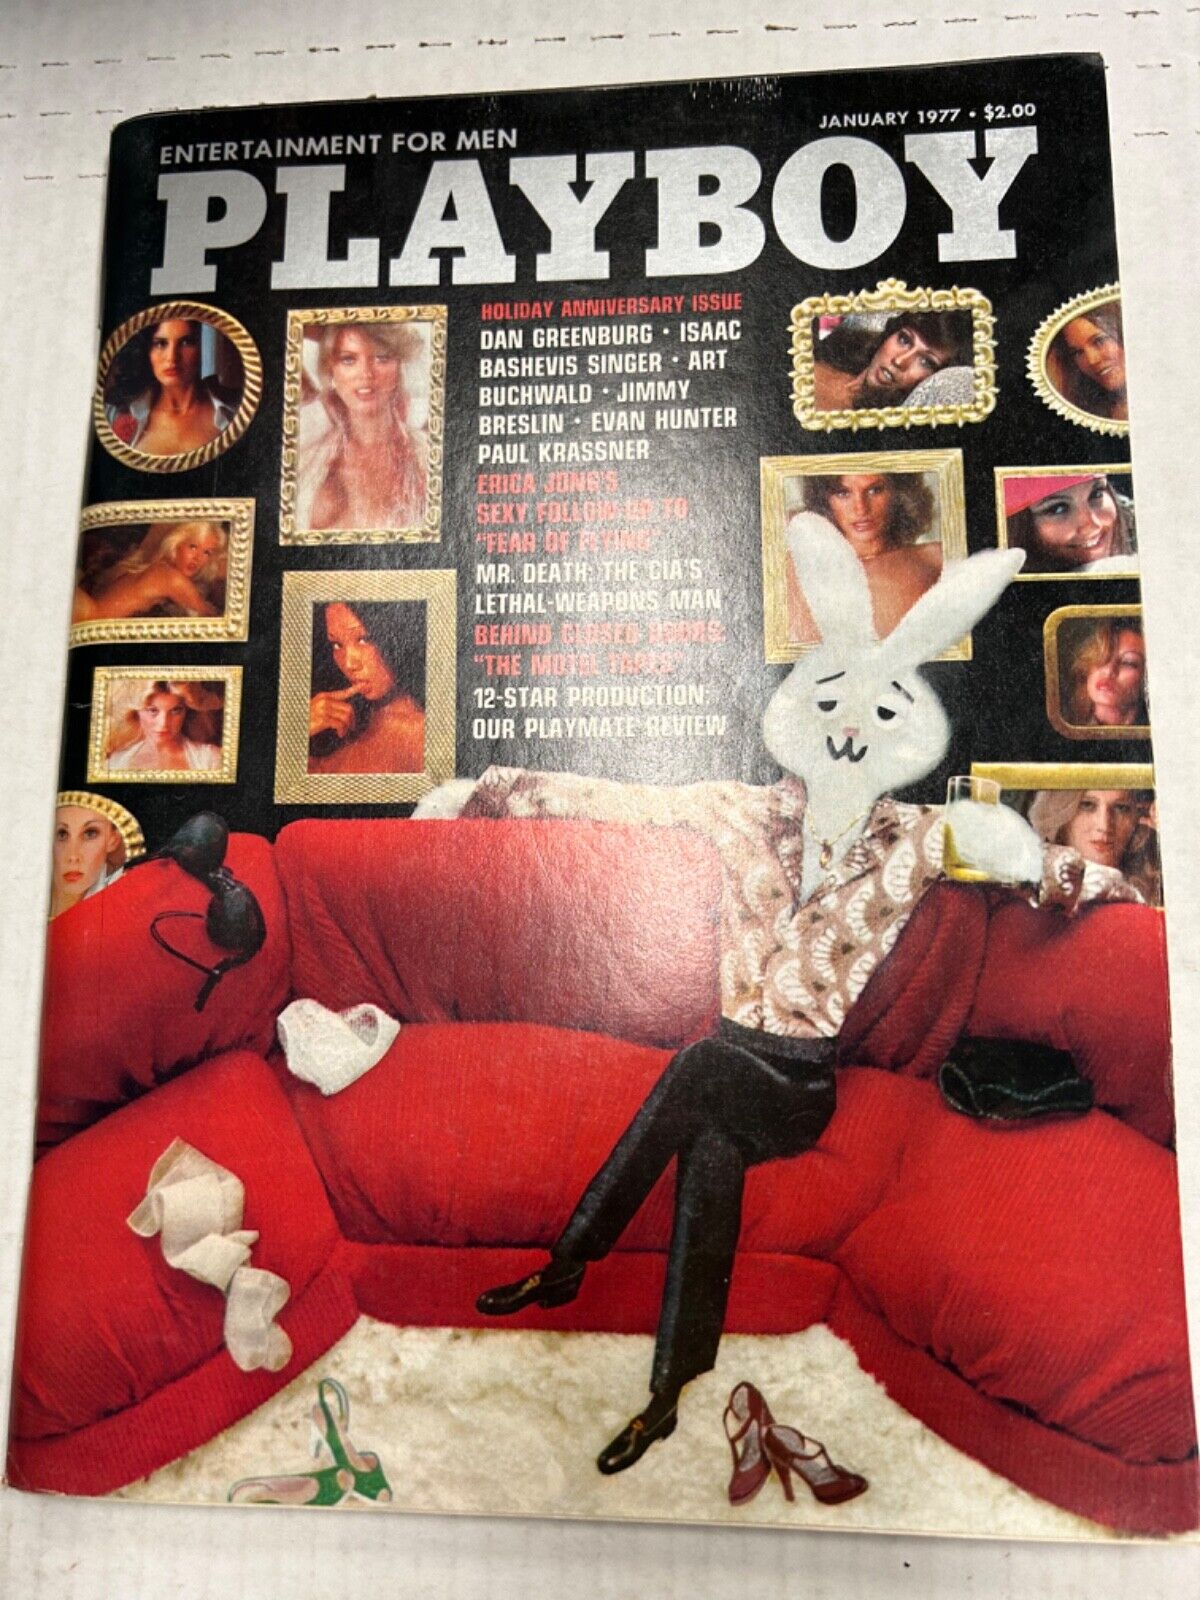 ariana ali recommends playmate of the year 1976 pic